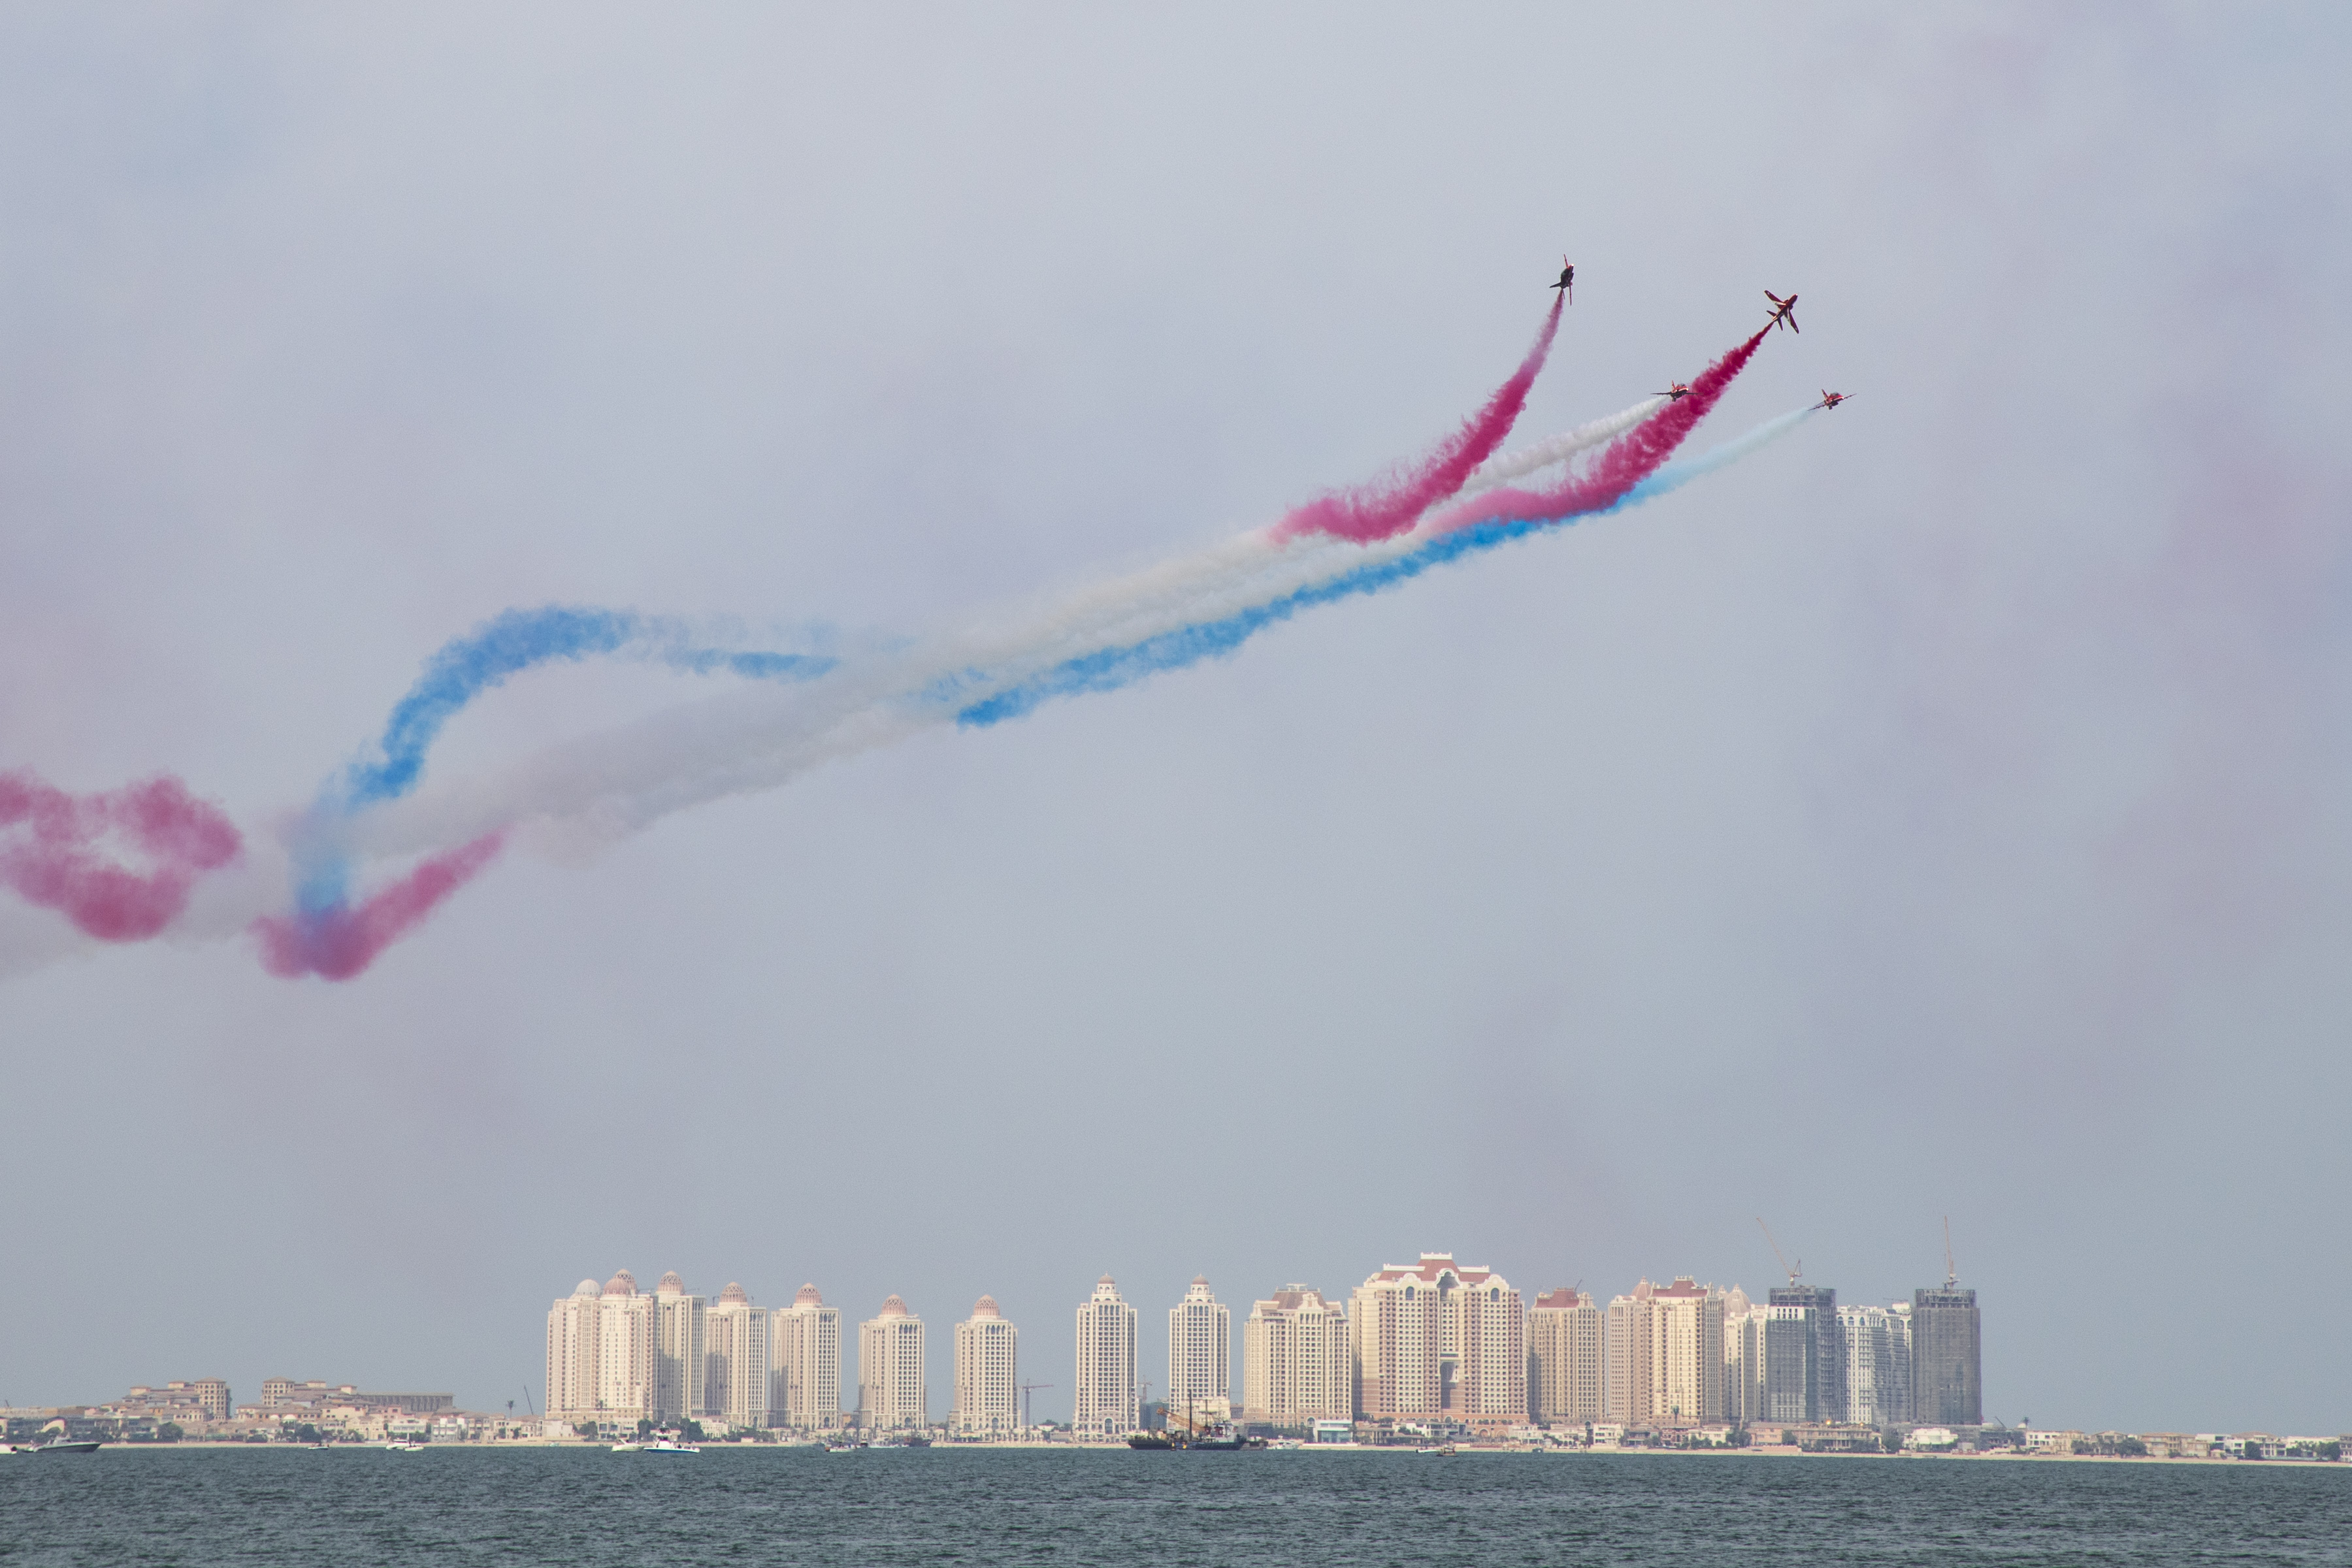 Image shows Red Arrows performing with red, blue and white smoke trails over Qatar skyline.